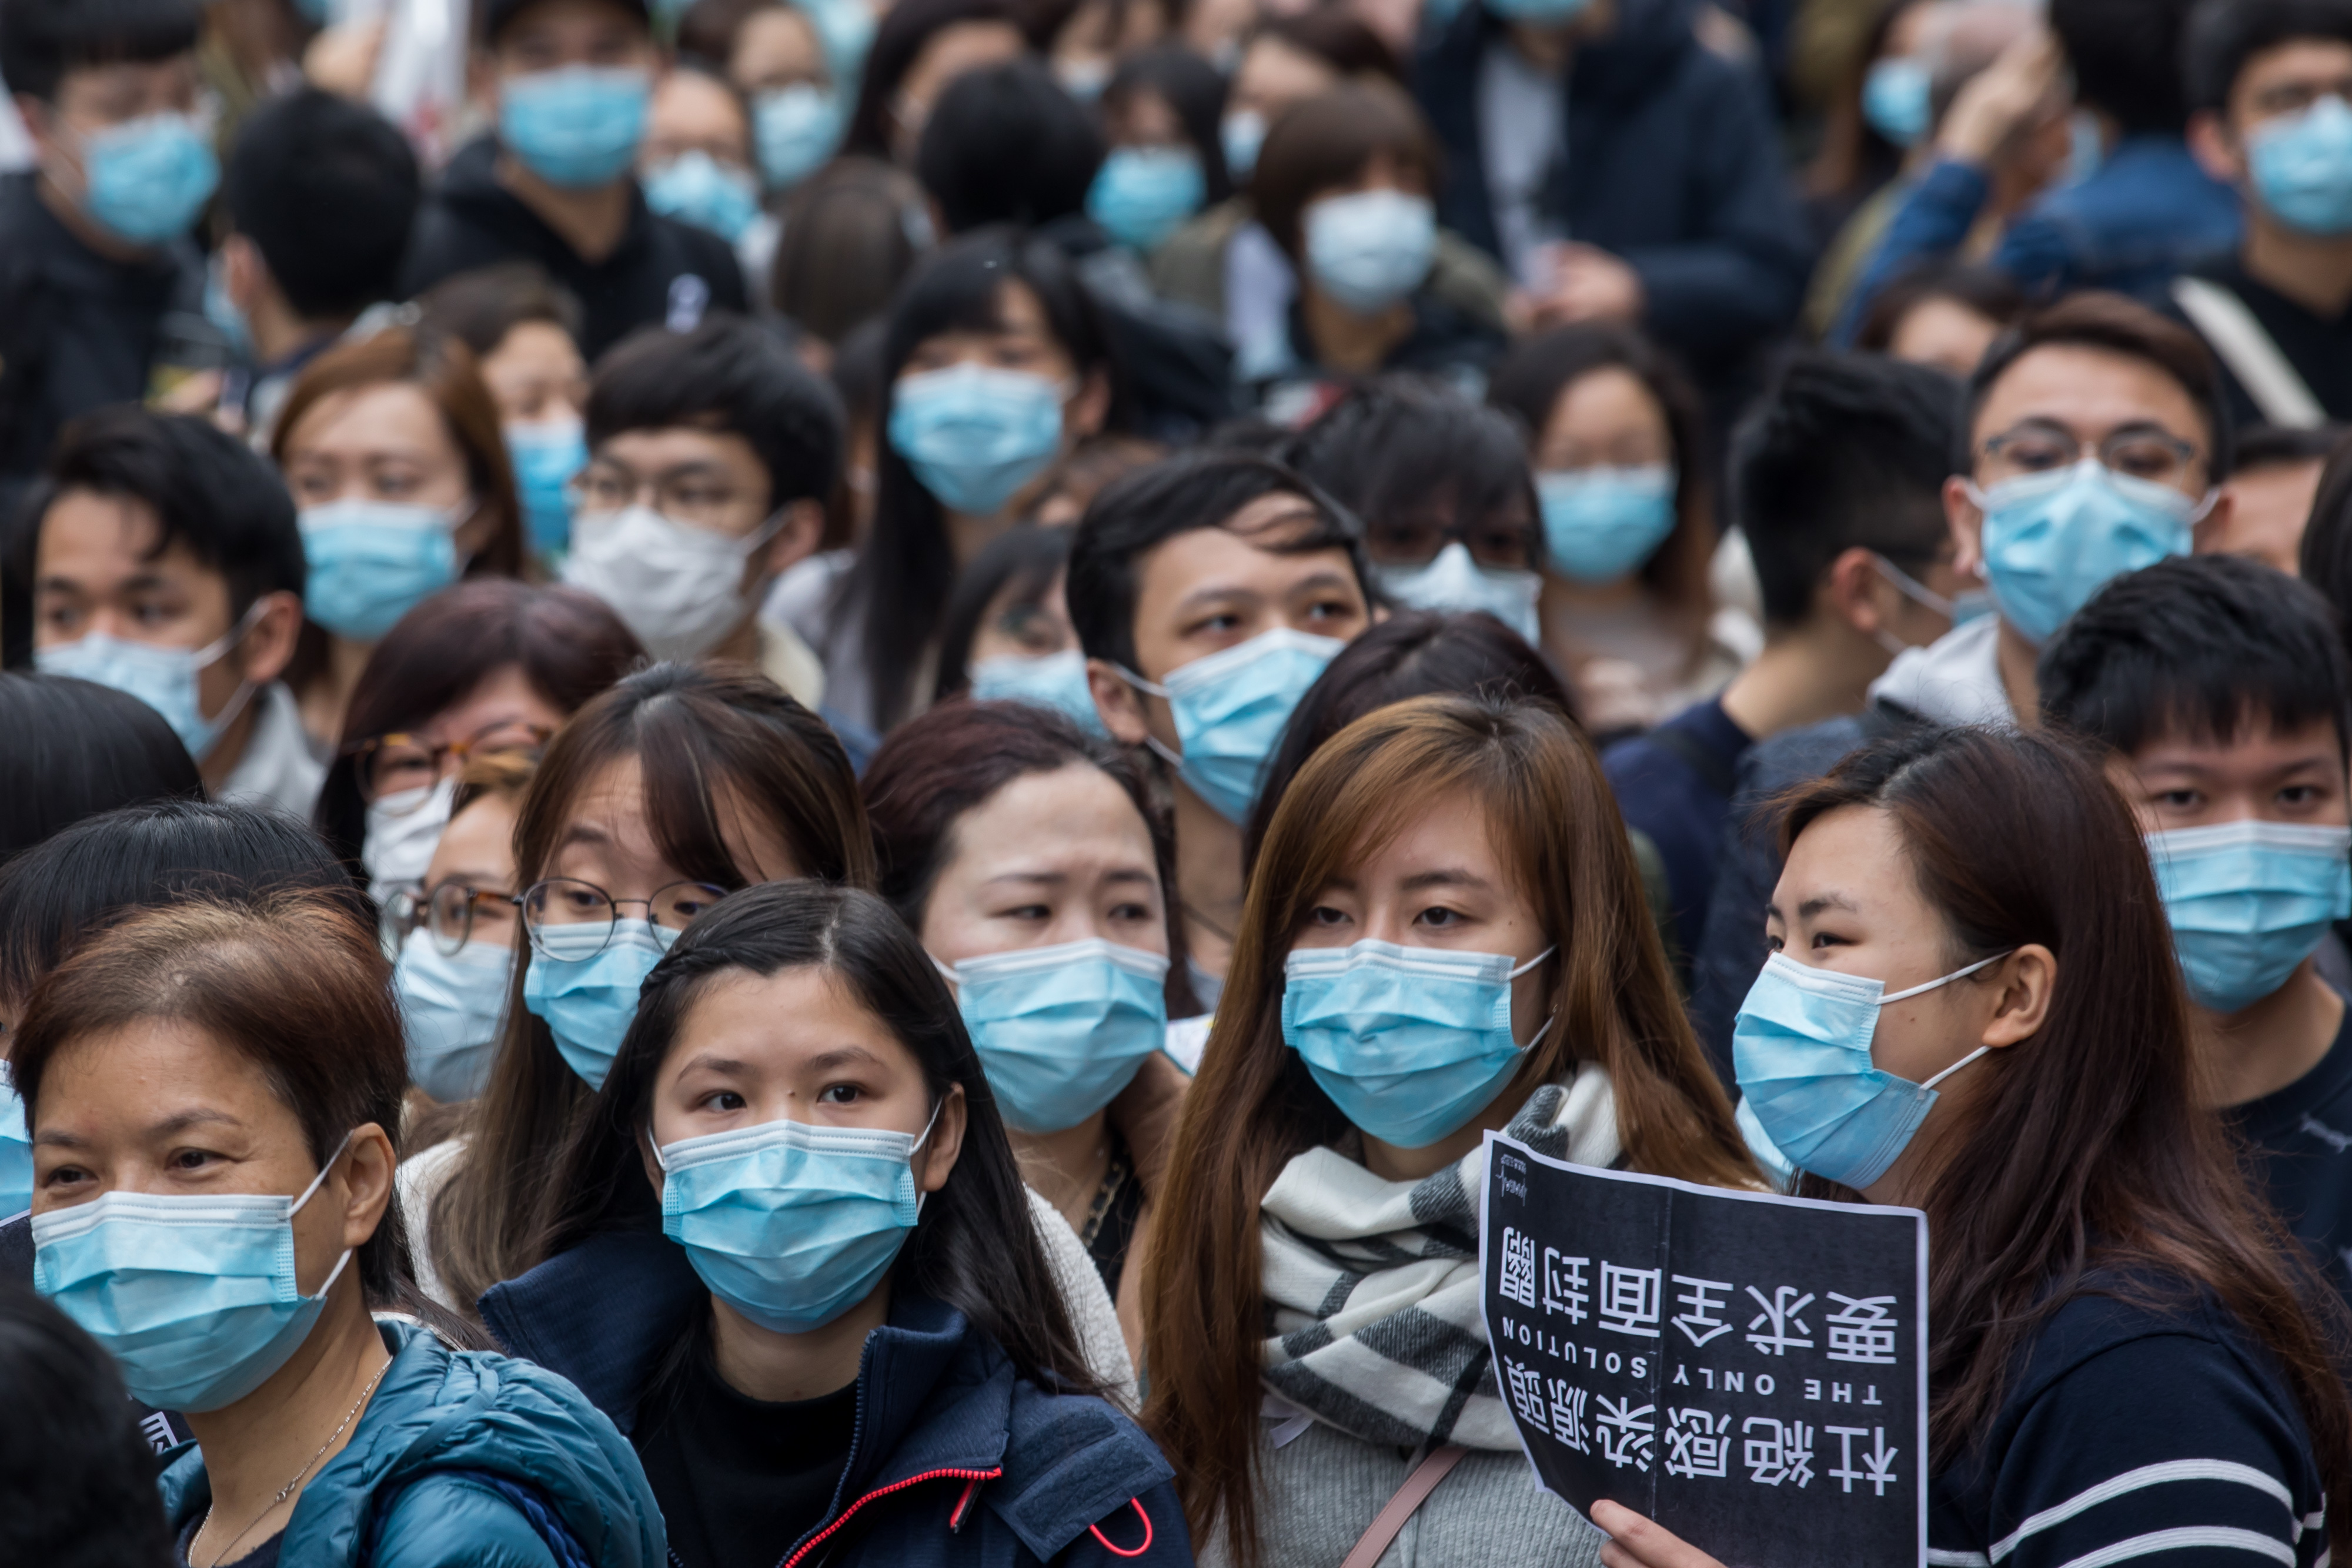 Medical workers wearing protective masks gather during a protest outside the Hospital Authority's head office in Hong Kong, China, on Feb. 4, 2020.